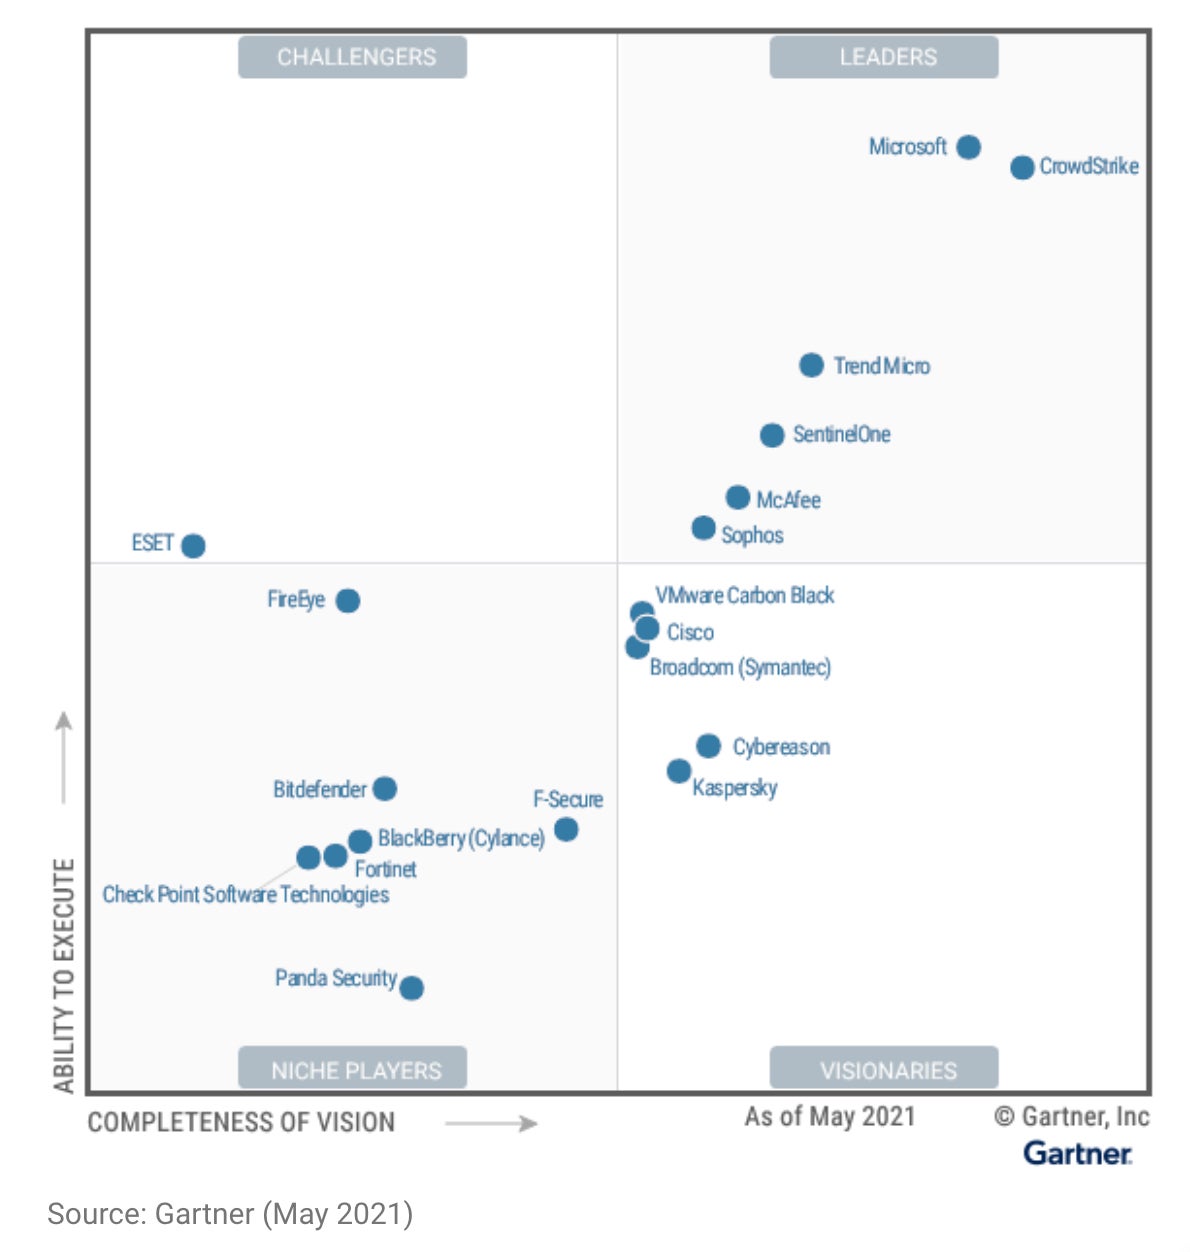 SentinelOne is a Leader in the 2021 Gartner Magic Quadrant for Endpoint